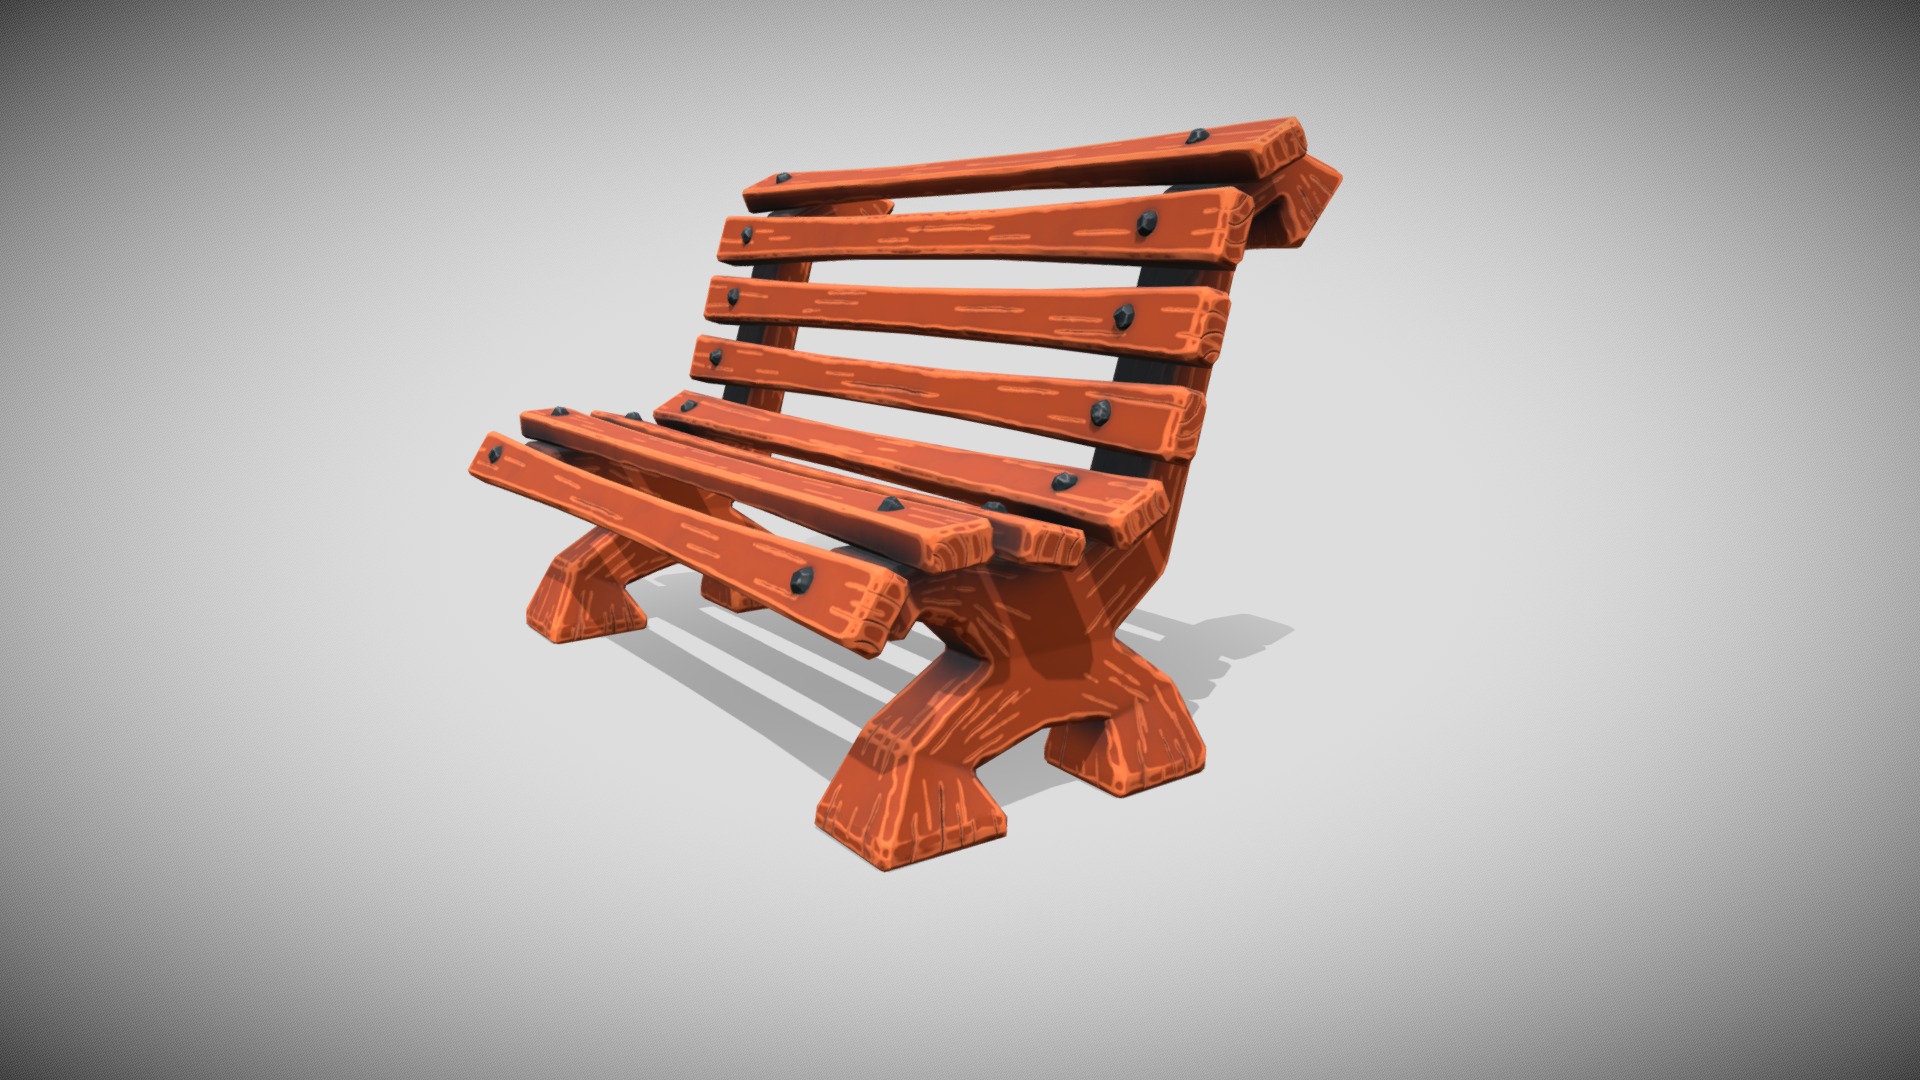 3D model Street bench – wood - This is a 3D model of the Street bench - wood. The 3D model is about a wooden toy gun.